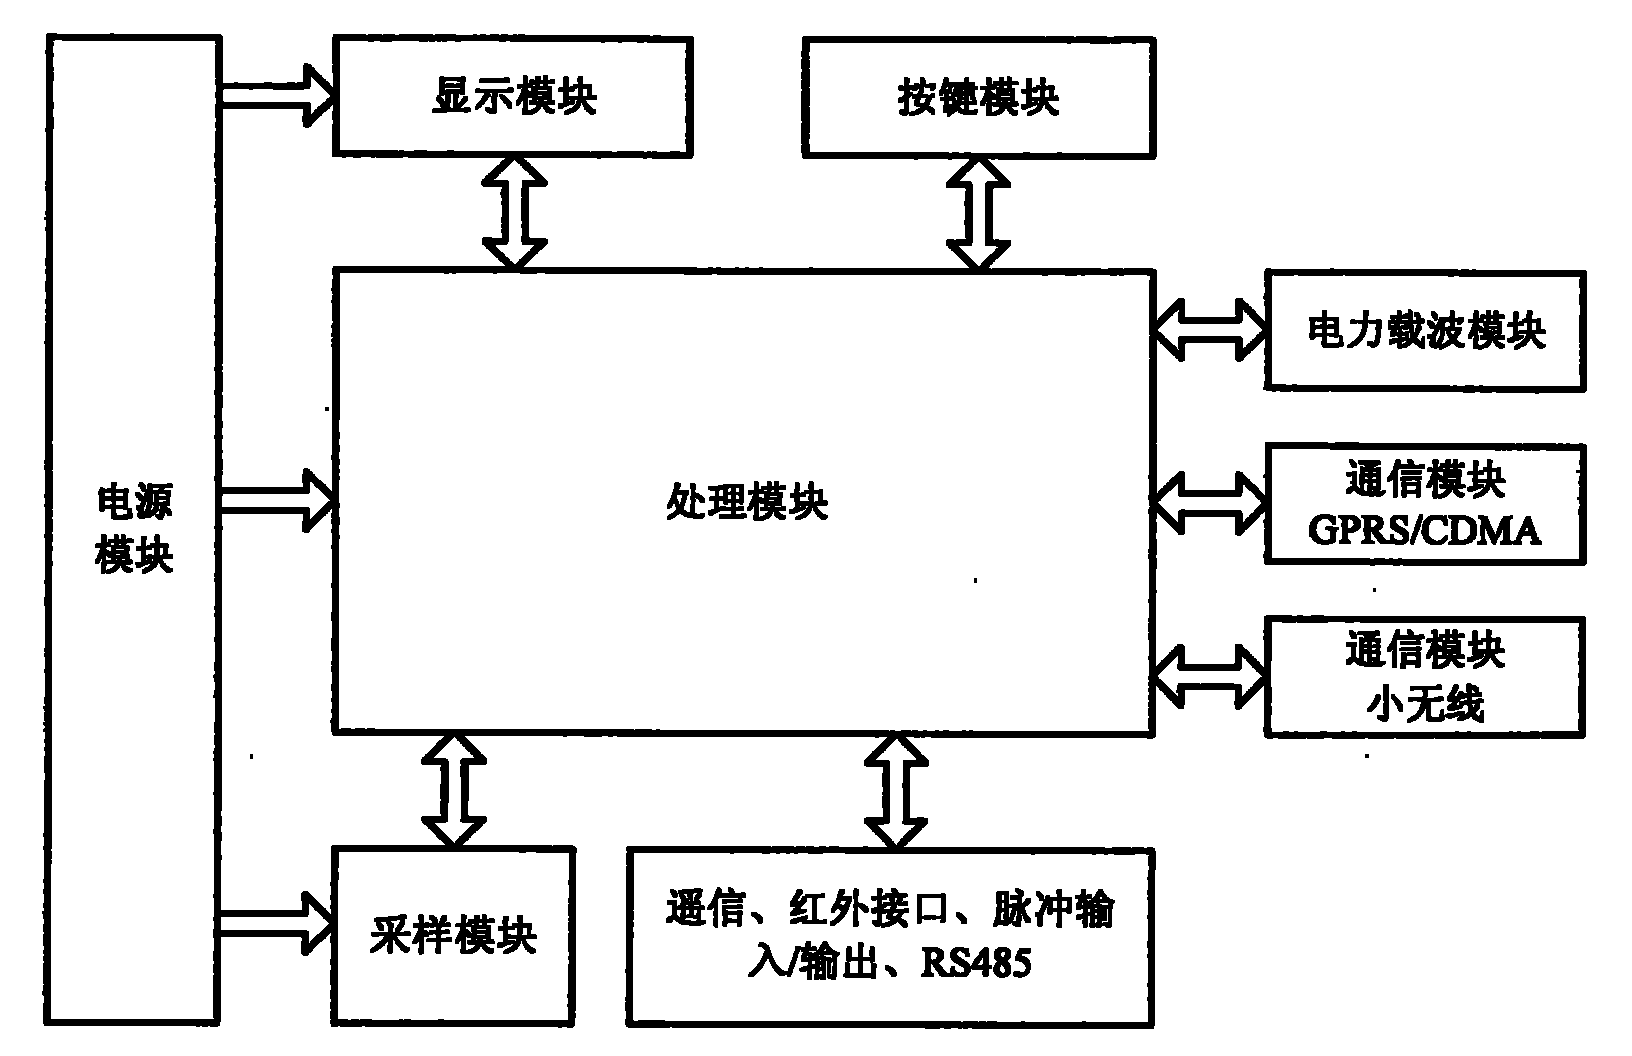 Electric energy acquisition and operation management system and method based on platform zone centralized service terminal